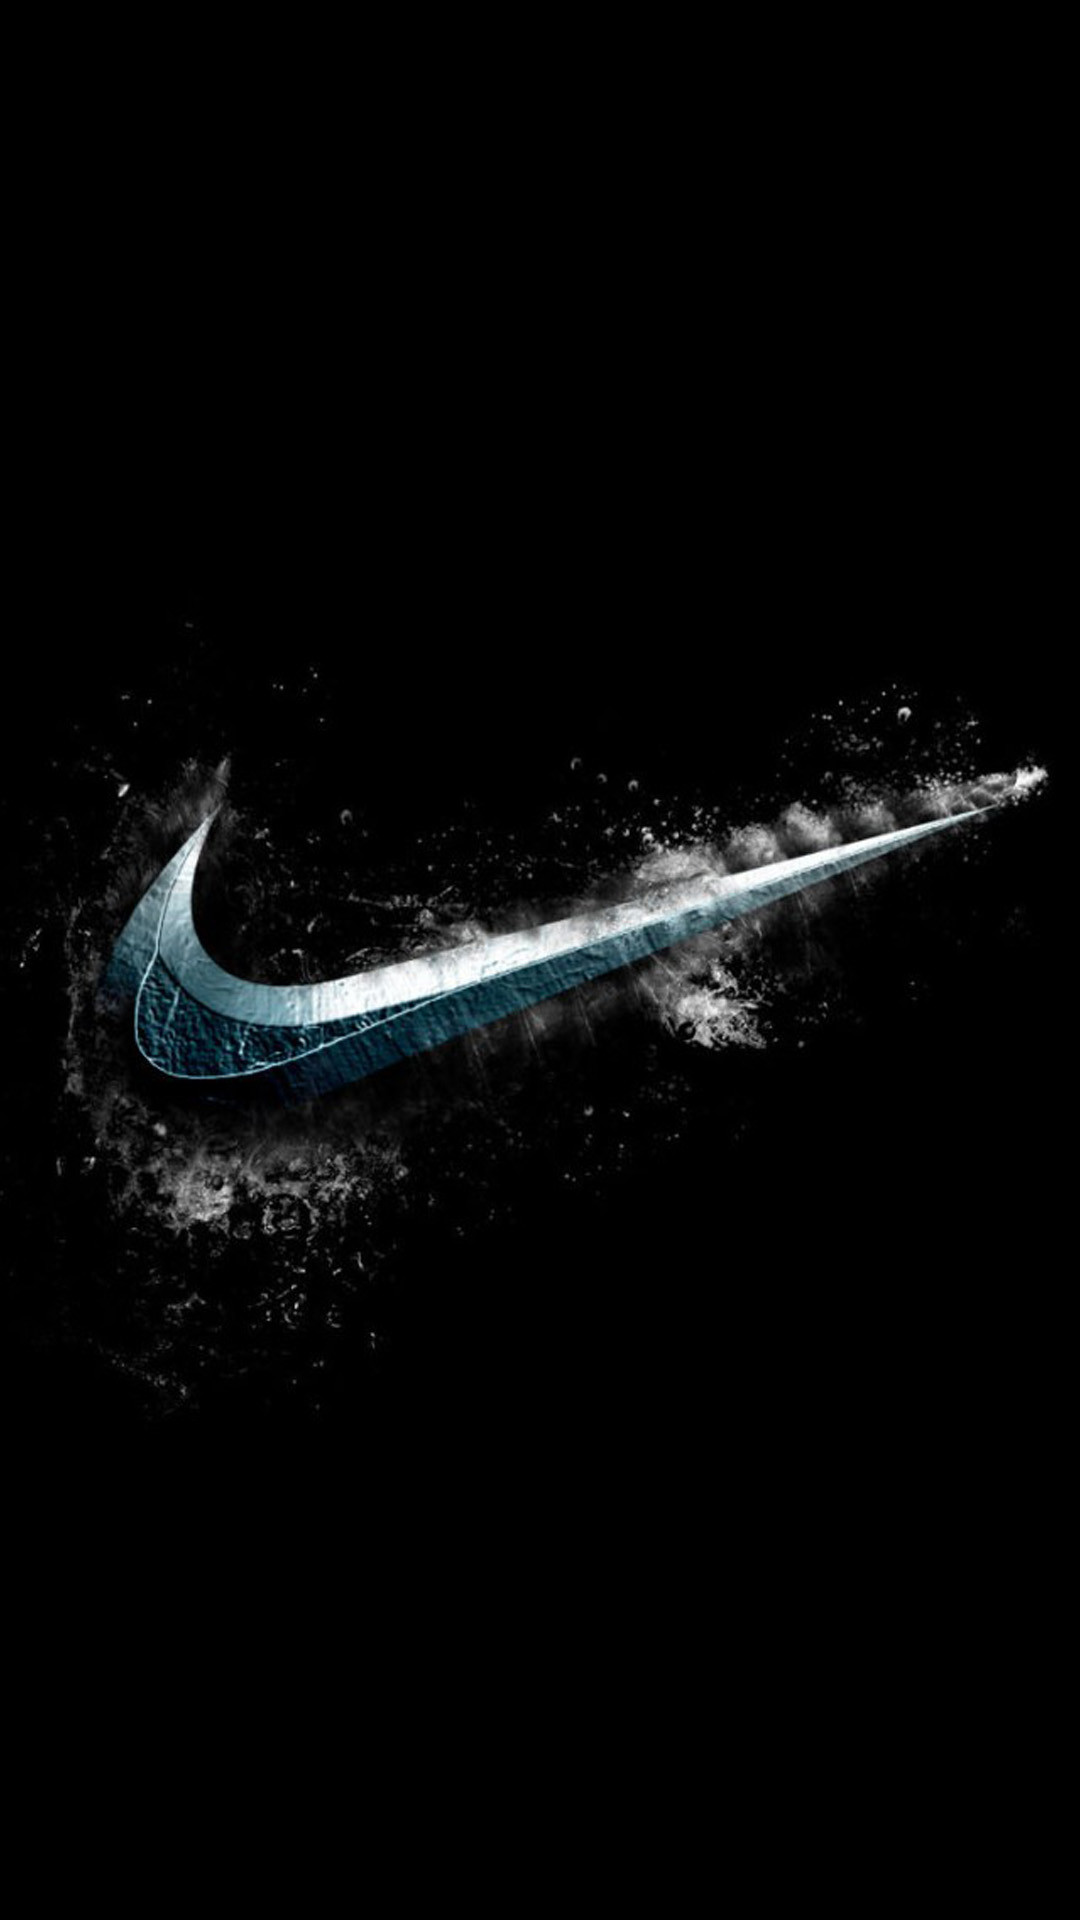 1080x1920 Nike LOGO 06 S4 Wallpapers, Samsung Galaxy S4 Wallpapers